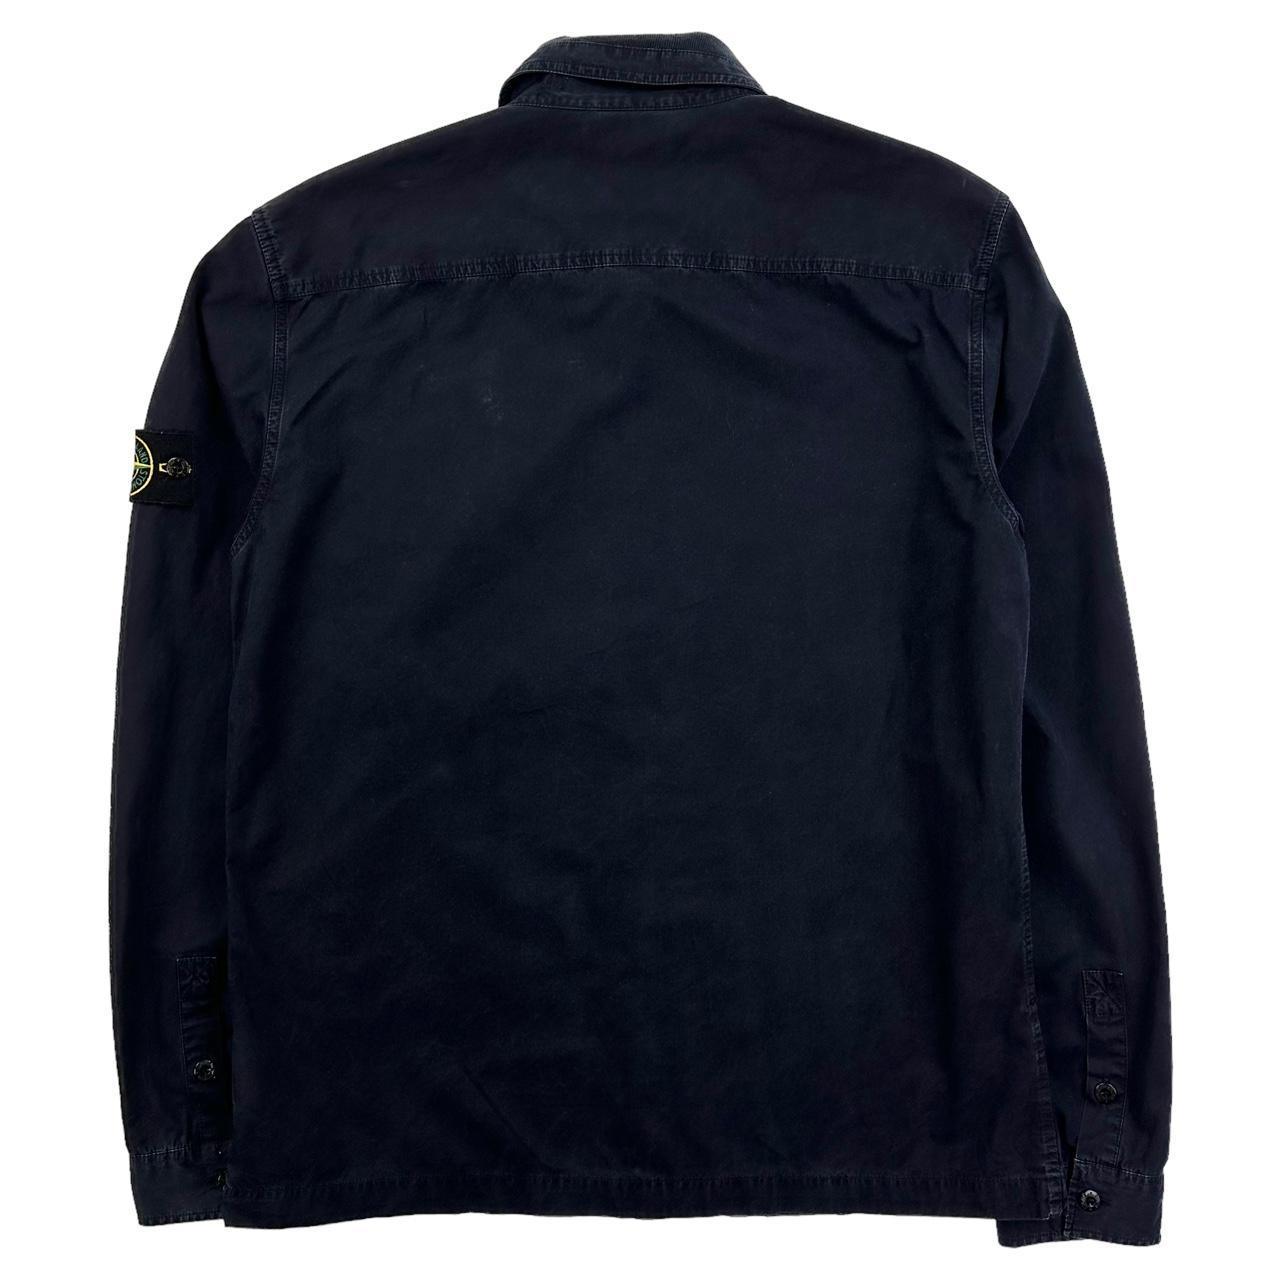 Stone Island Zip over shirt size M - Known Source